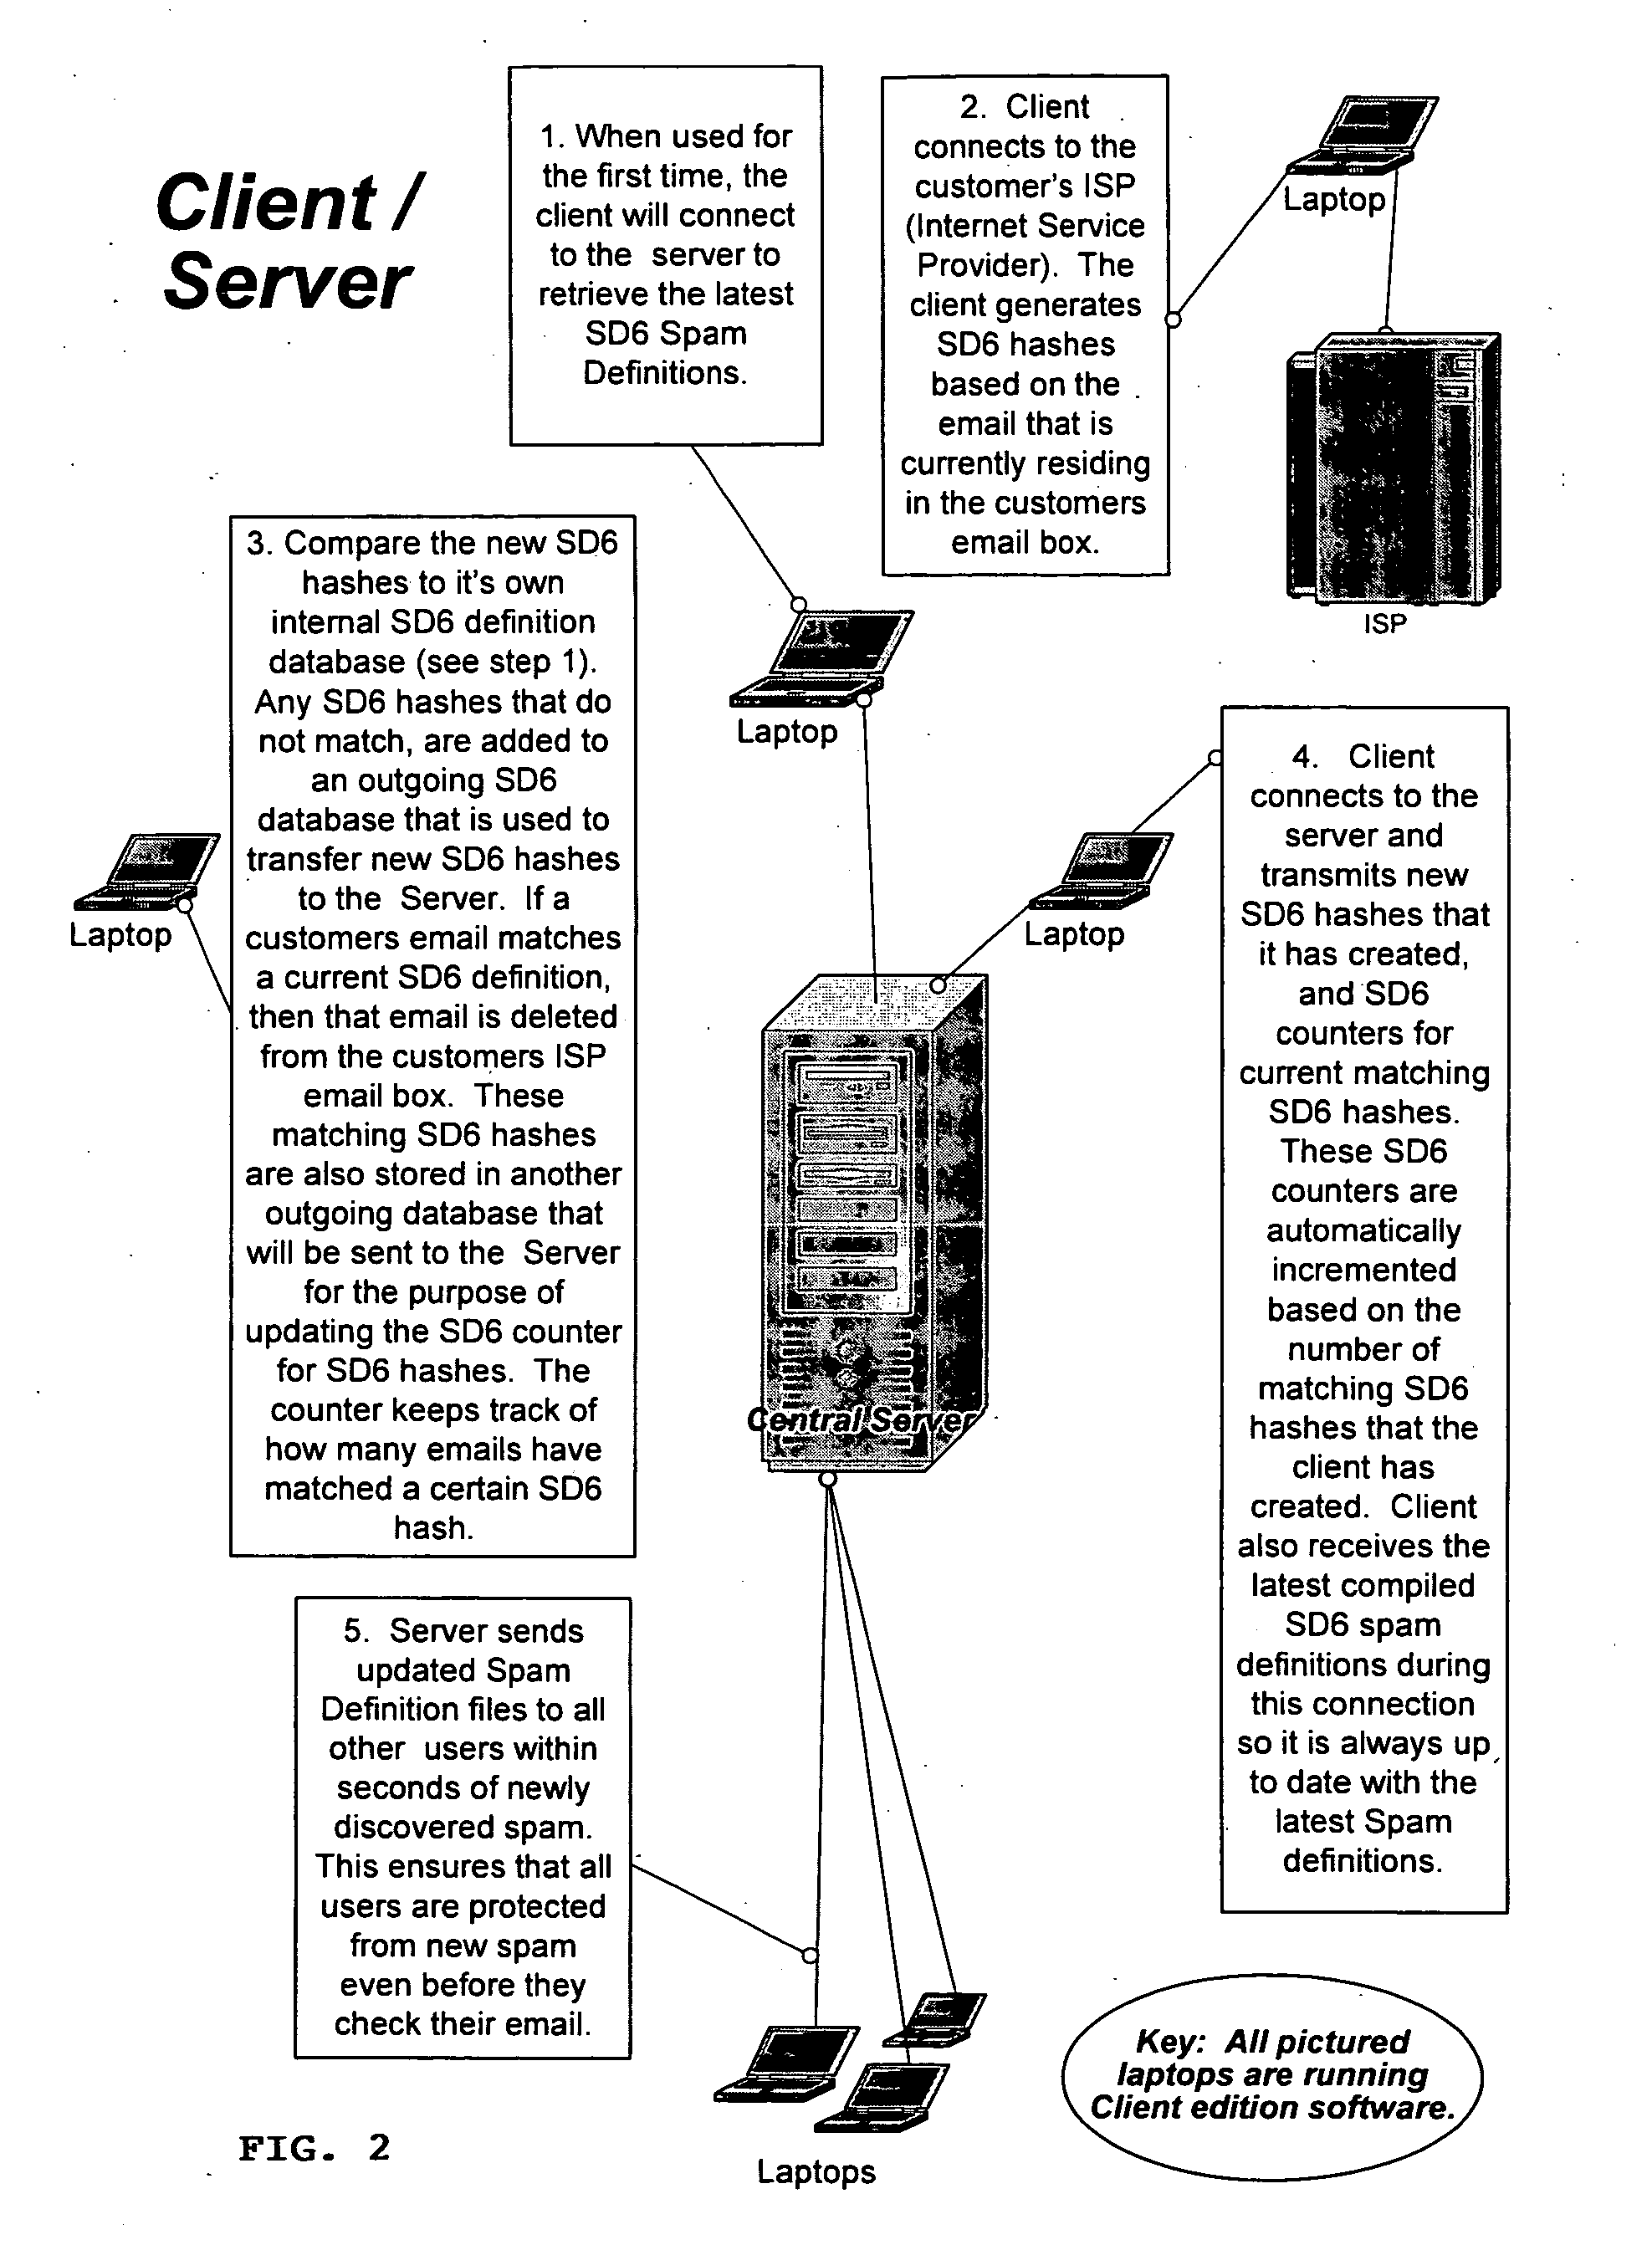 Method of detecting, comparing, blocking, and eliminating spam emails